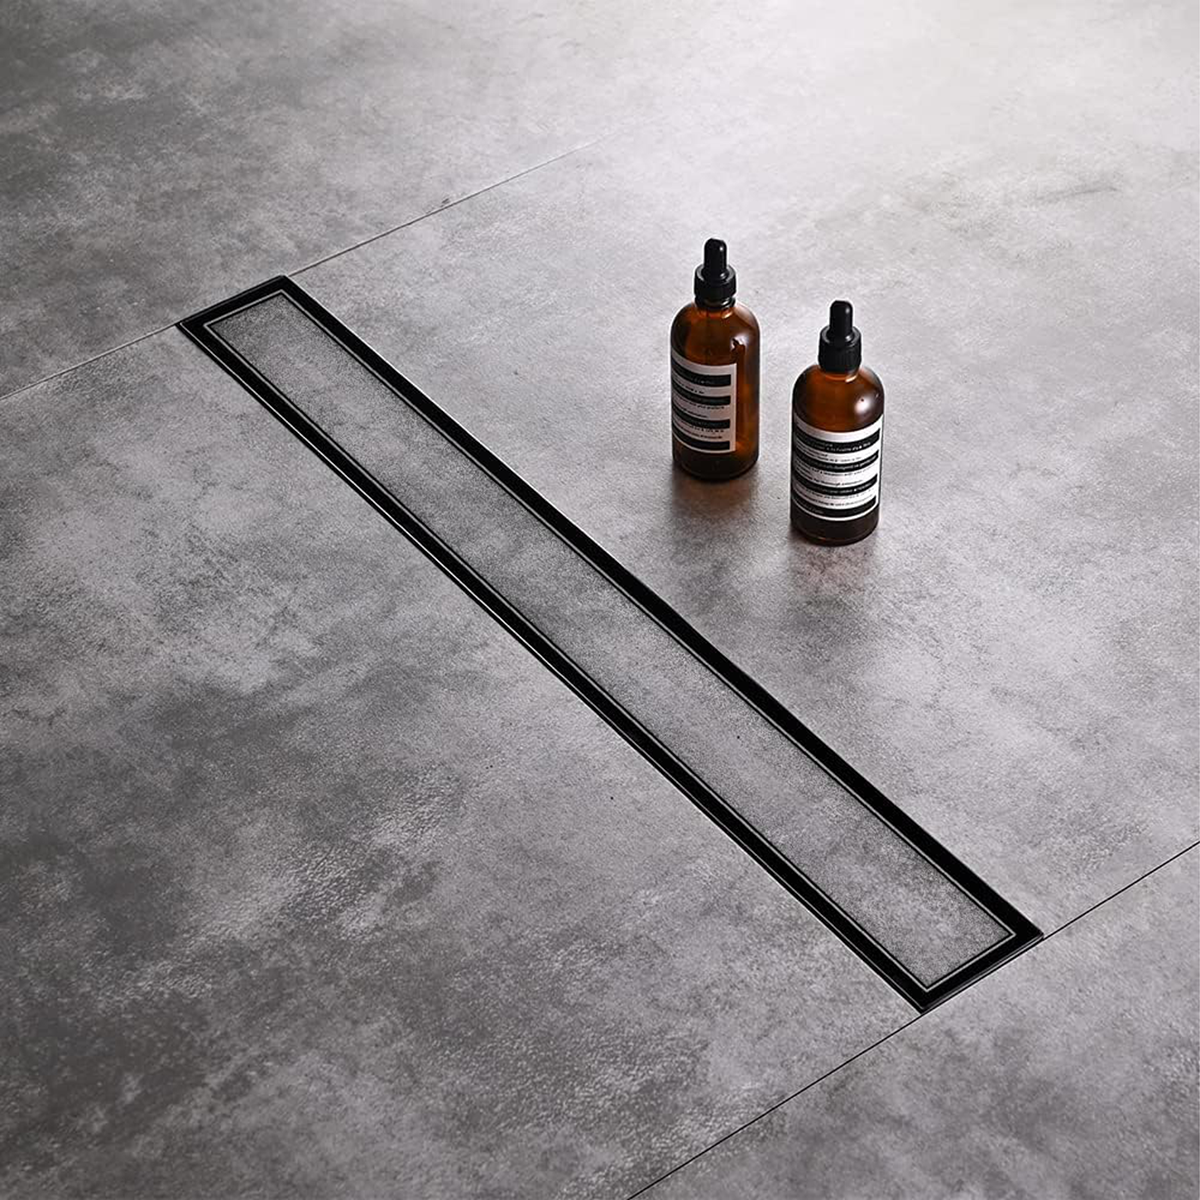 Marble Insert Shower Drain Channel (18 x 4 Inches) Black PVD Coated - by Ruhe®